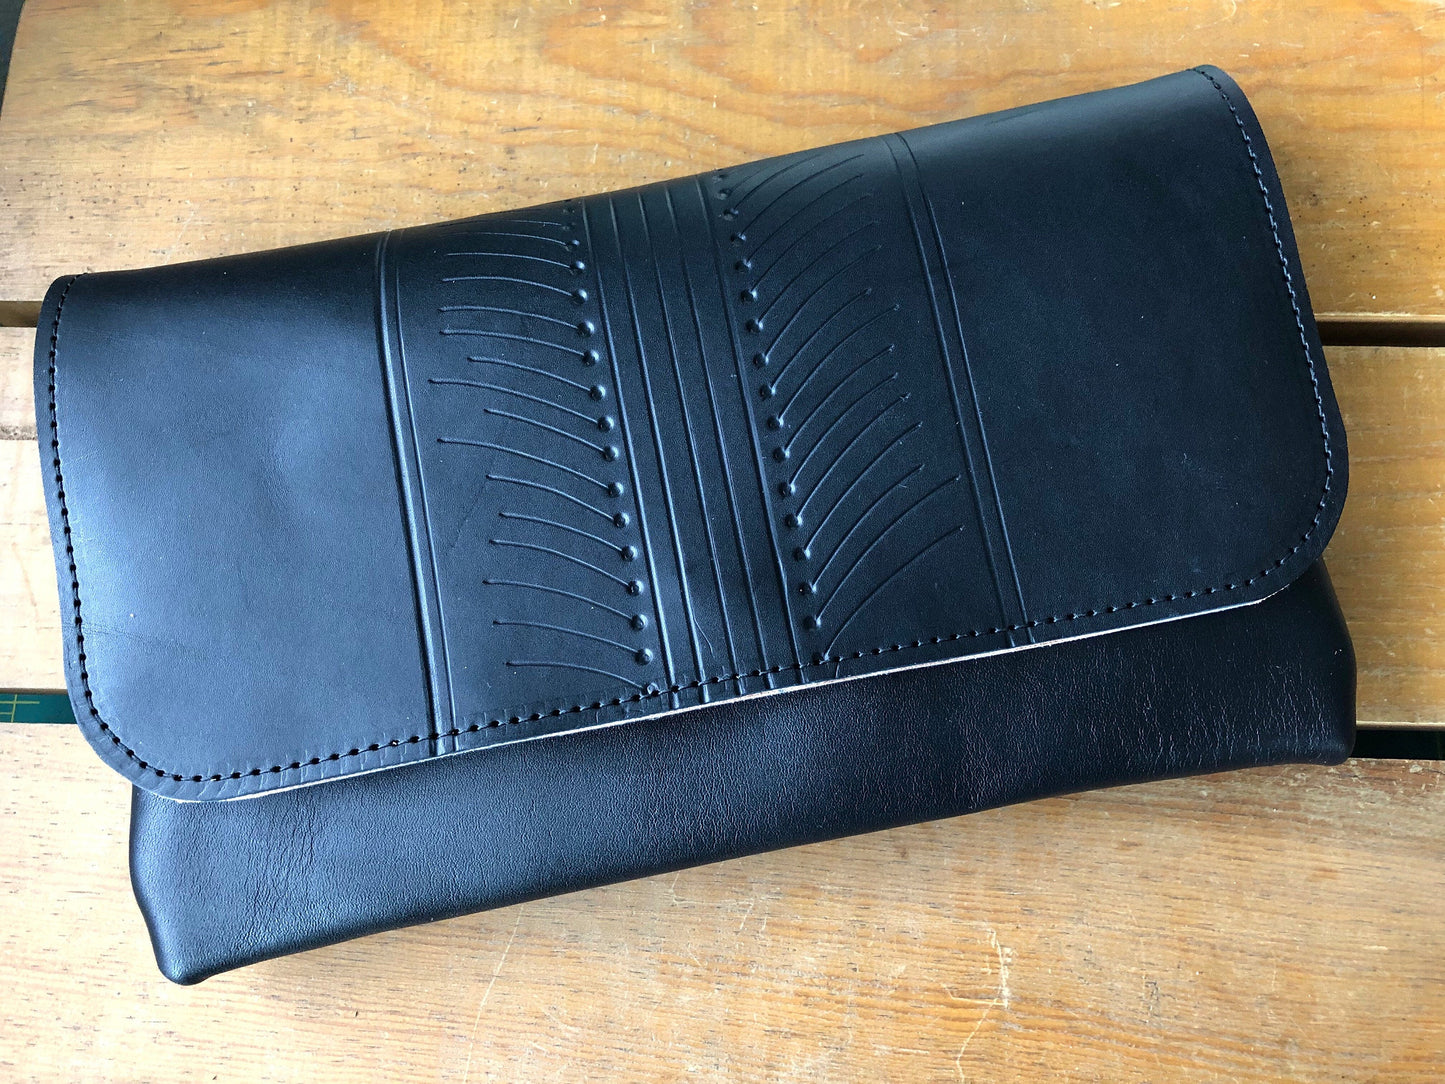 Black leather clutch with patterned design on front, sitting on a table